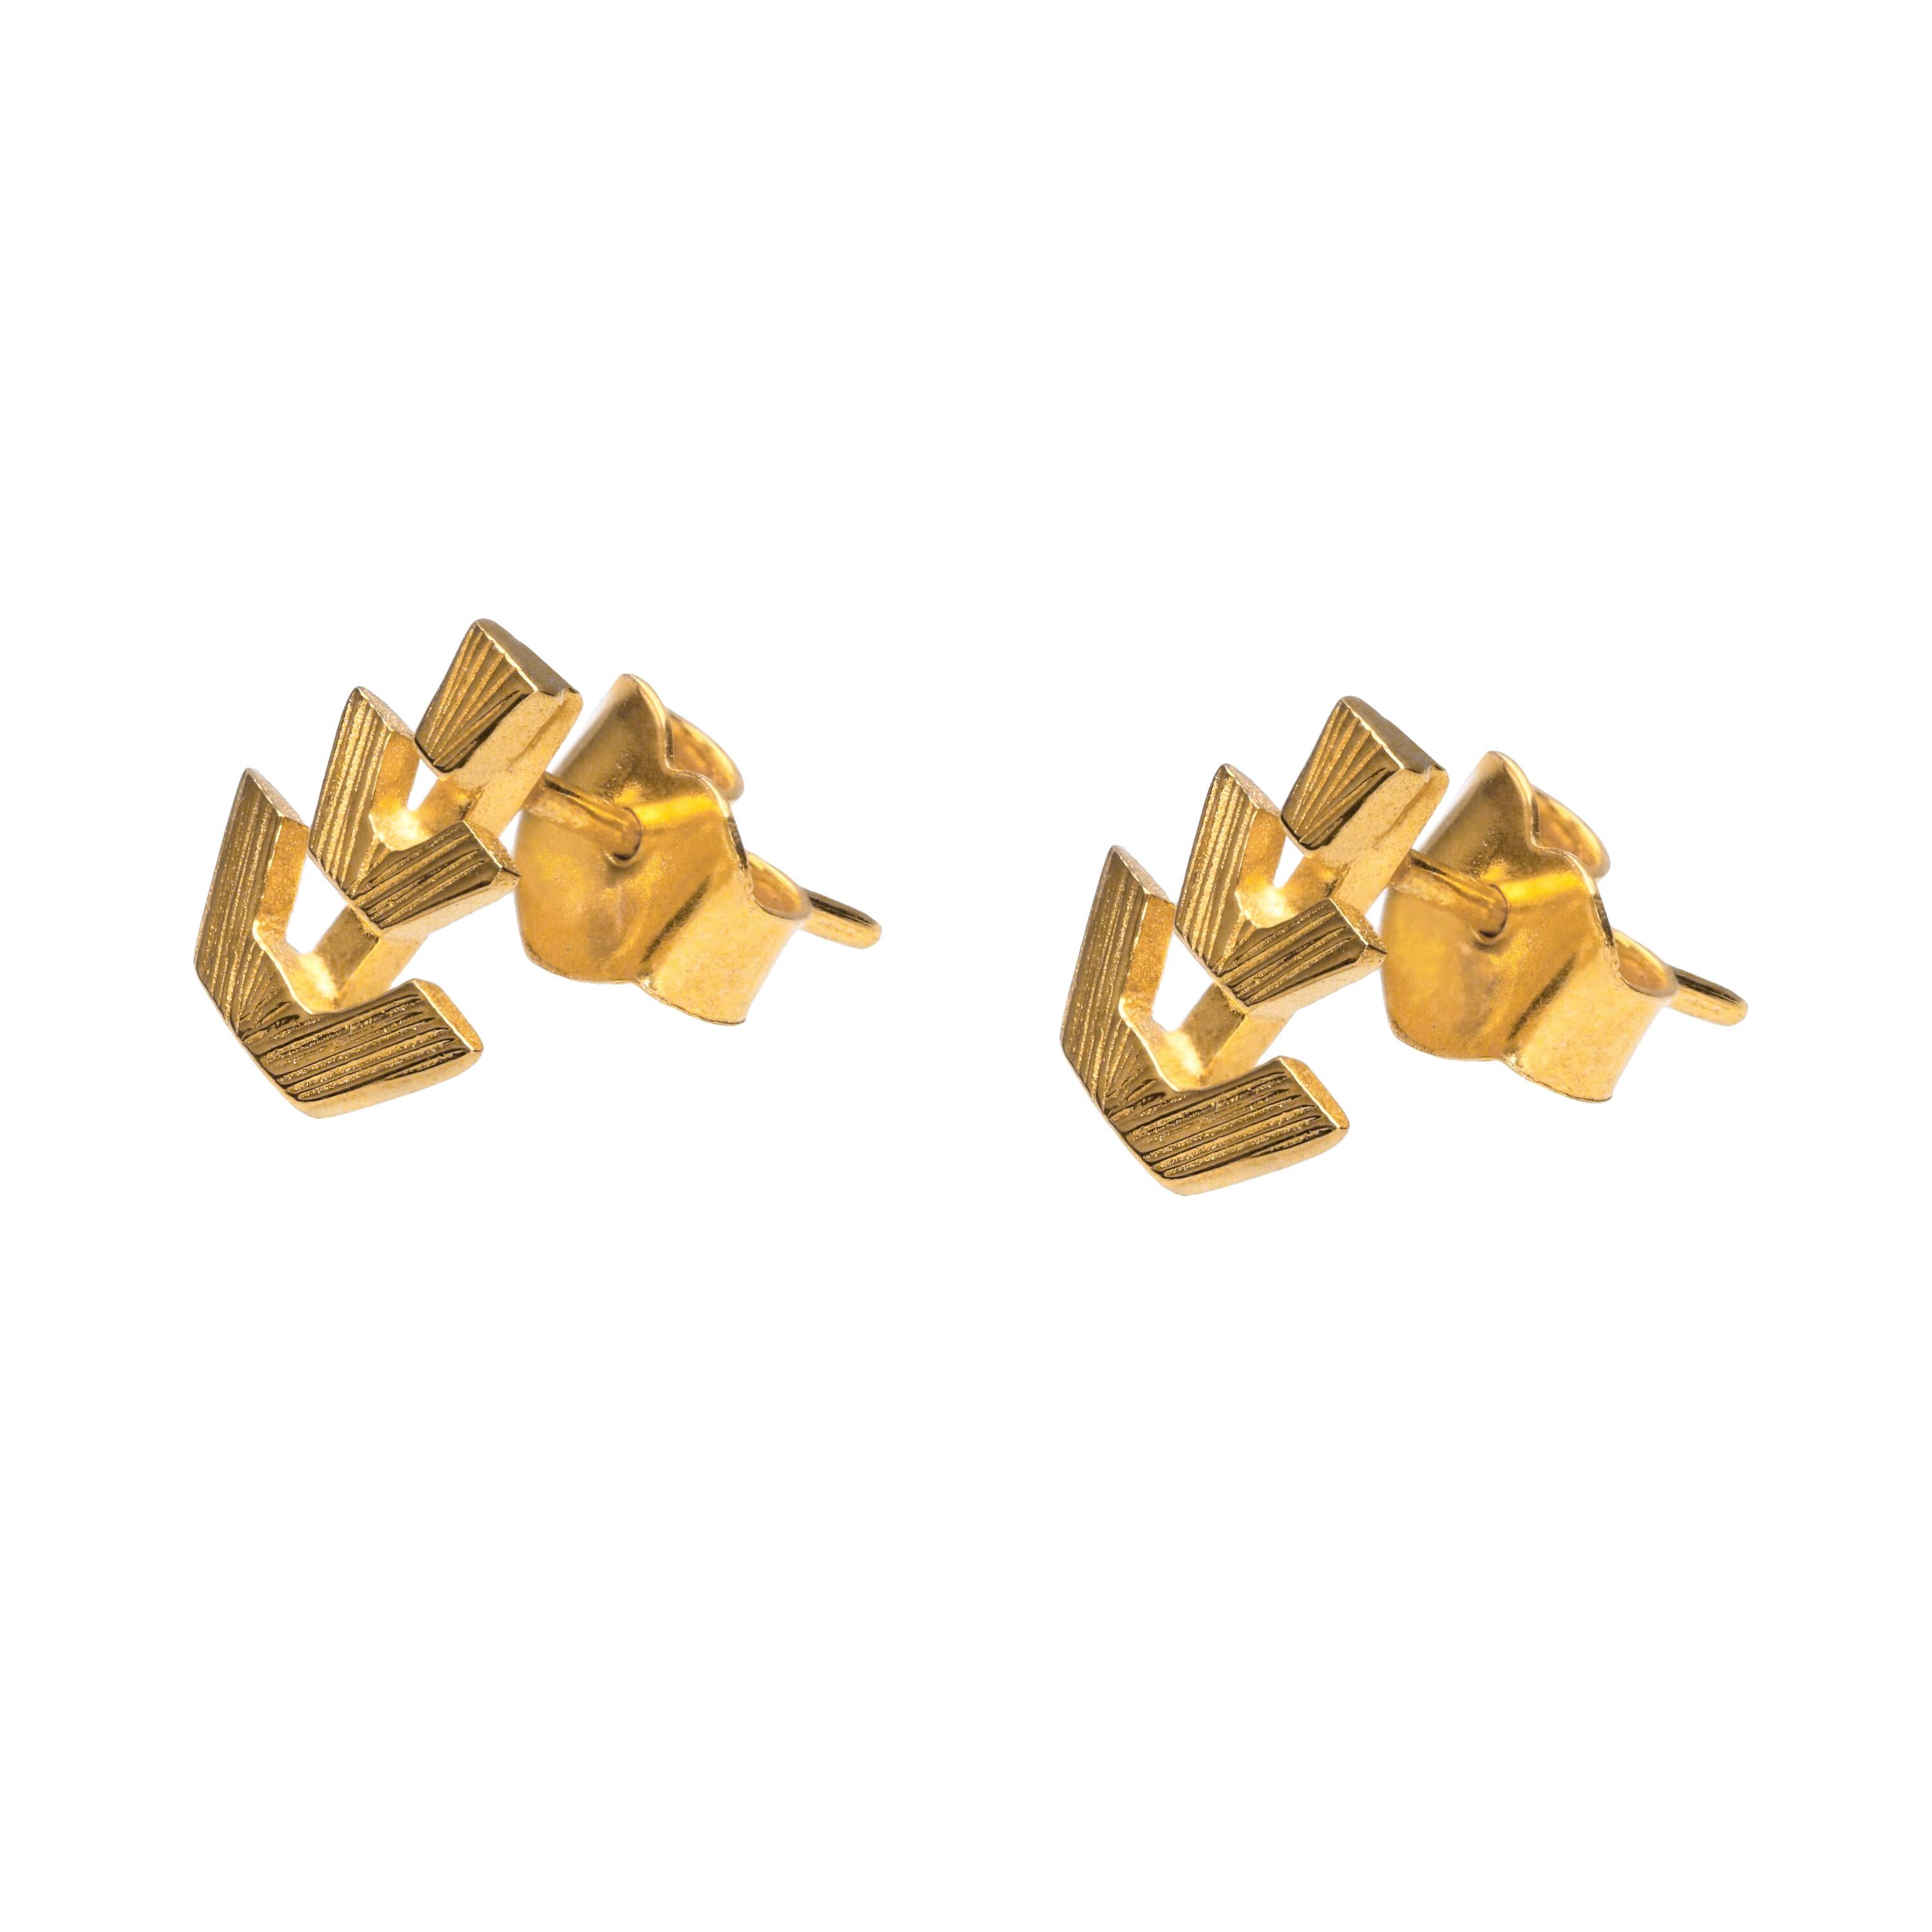 The Greca Earrings Studs, crafted in 14k yellow gold, inspired by the decorative motifs of Ancient Mayan. These simple yet mesmerizing earrings showcase simple patterns and hammered textures, capturing the timeless beauty of ZacBe. 

Effortlessly